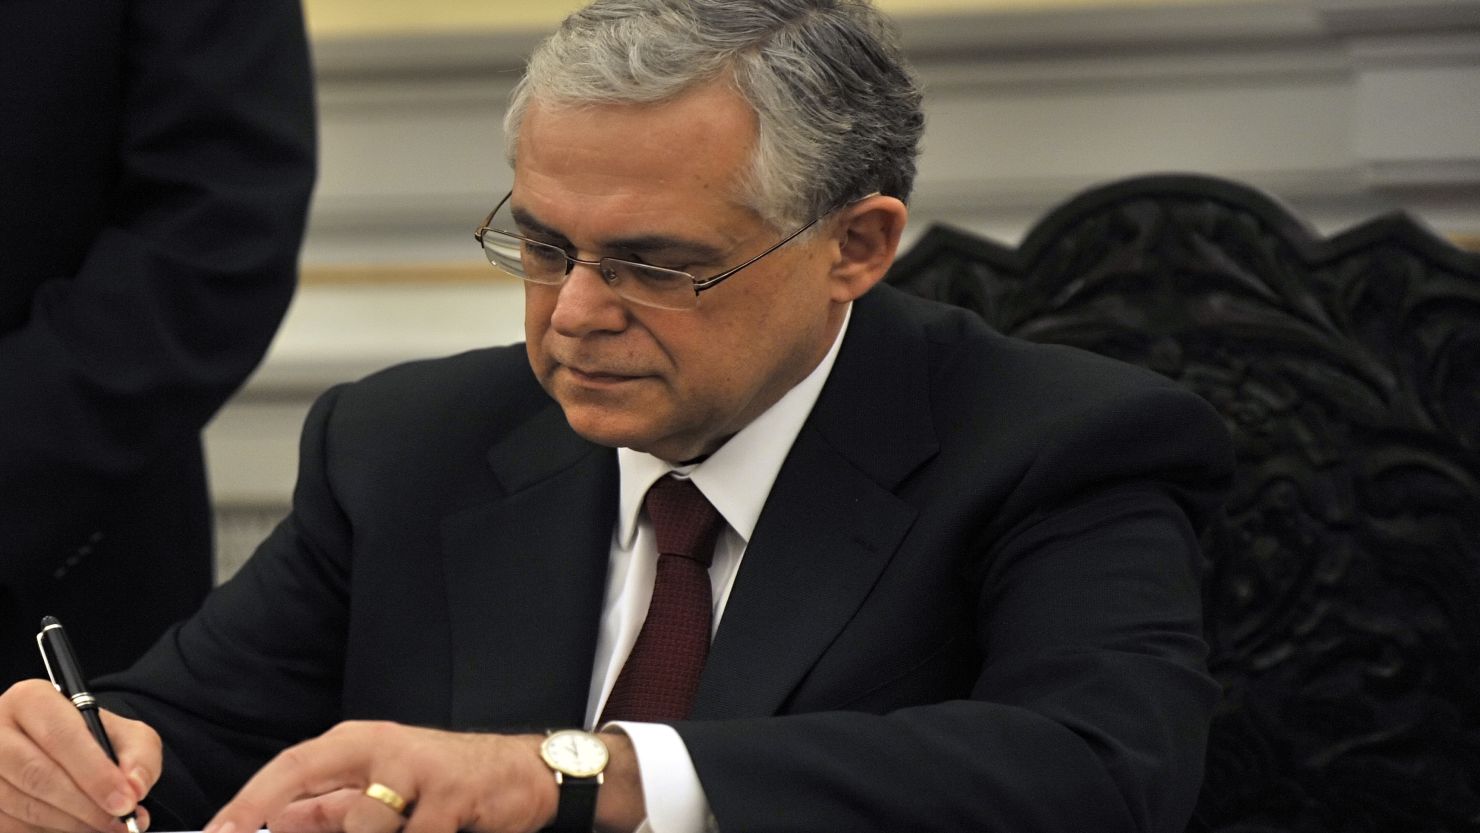 Lucas Papademos signs documents after being sworn in as Greece's new Prime Minister in Athens on Friday.